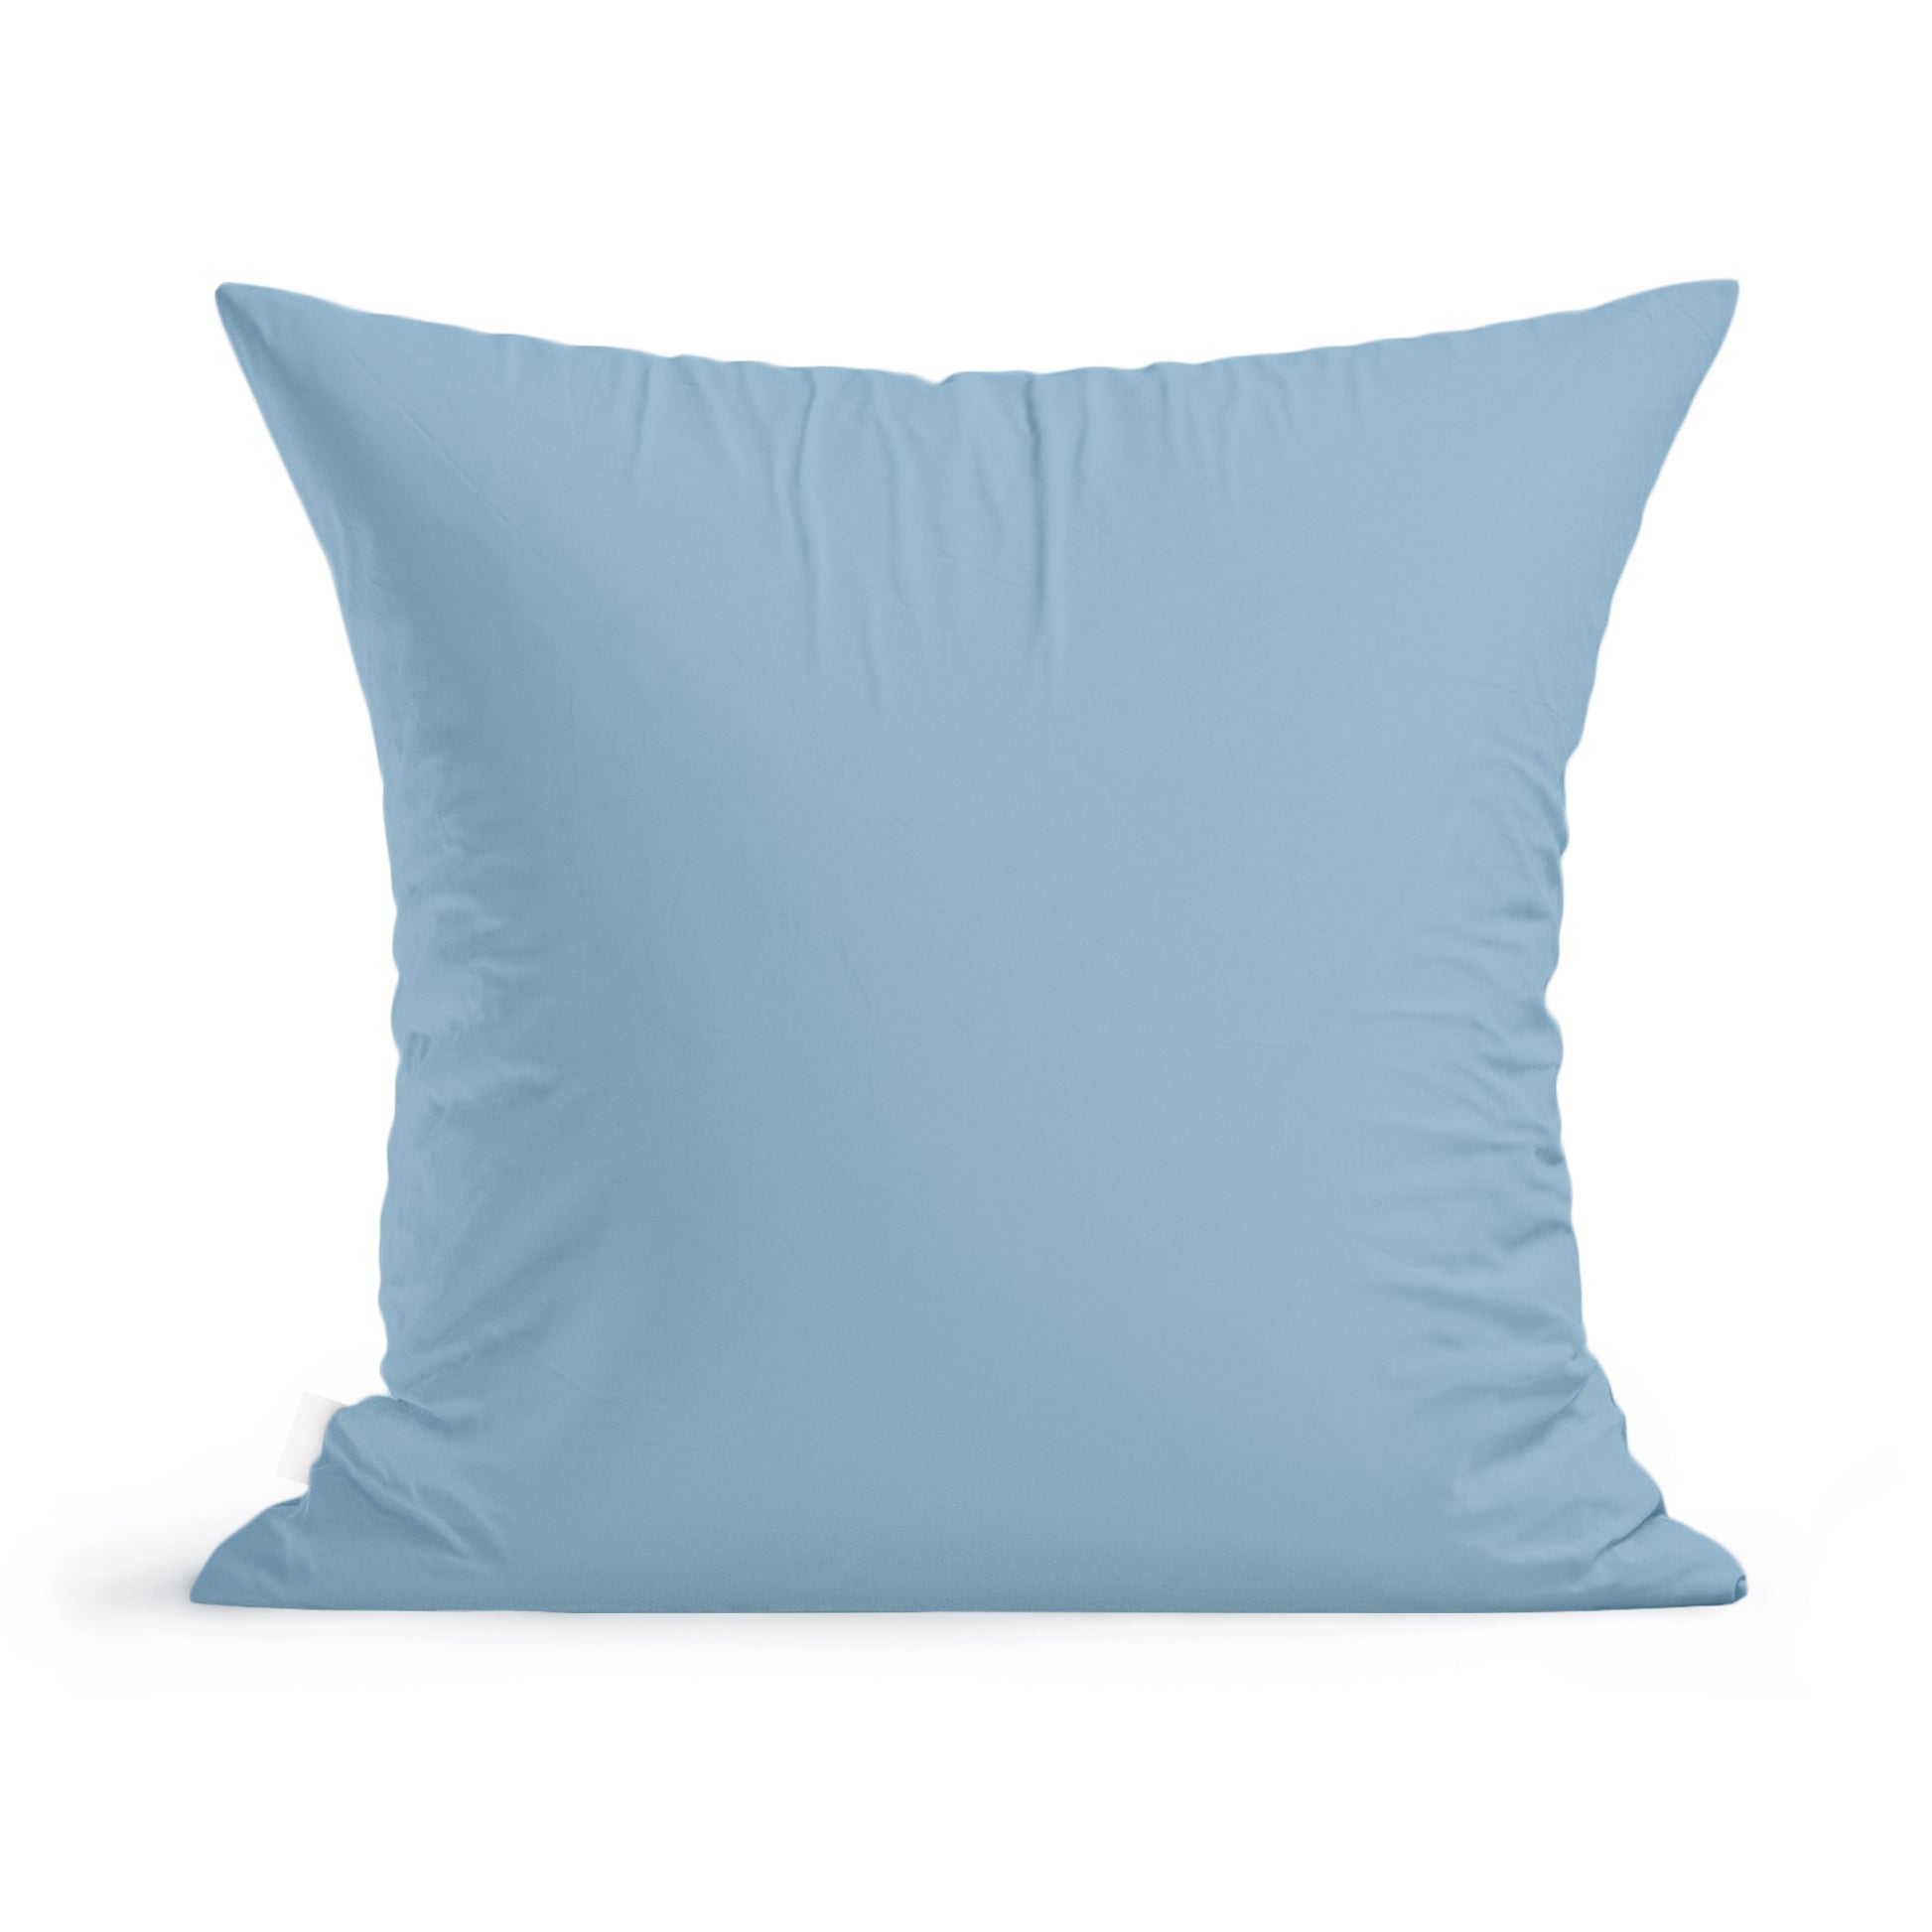 A light blue Rustic County Little Birds Pillow isolated on a white background.